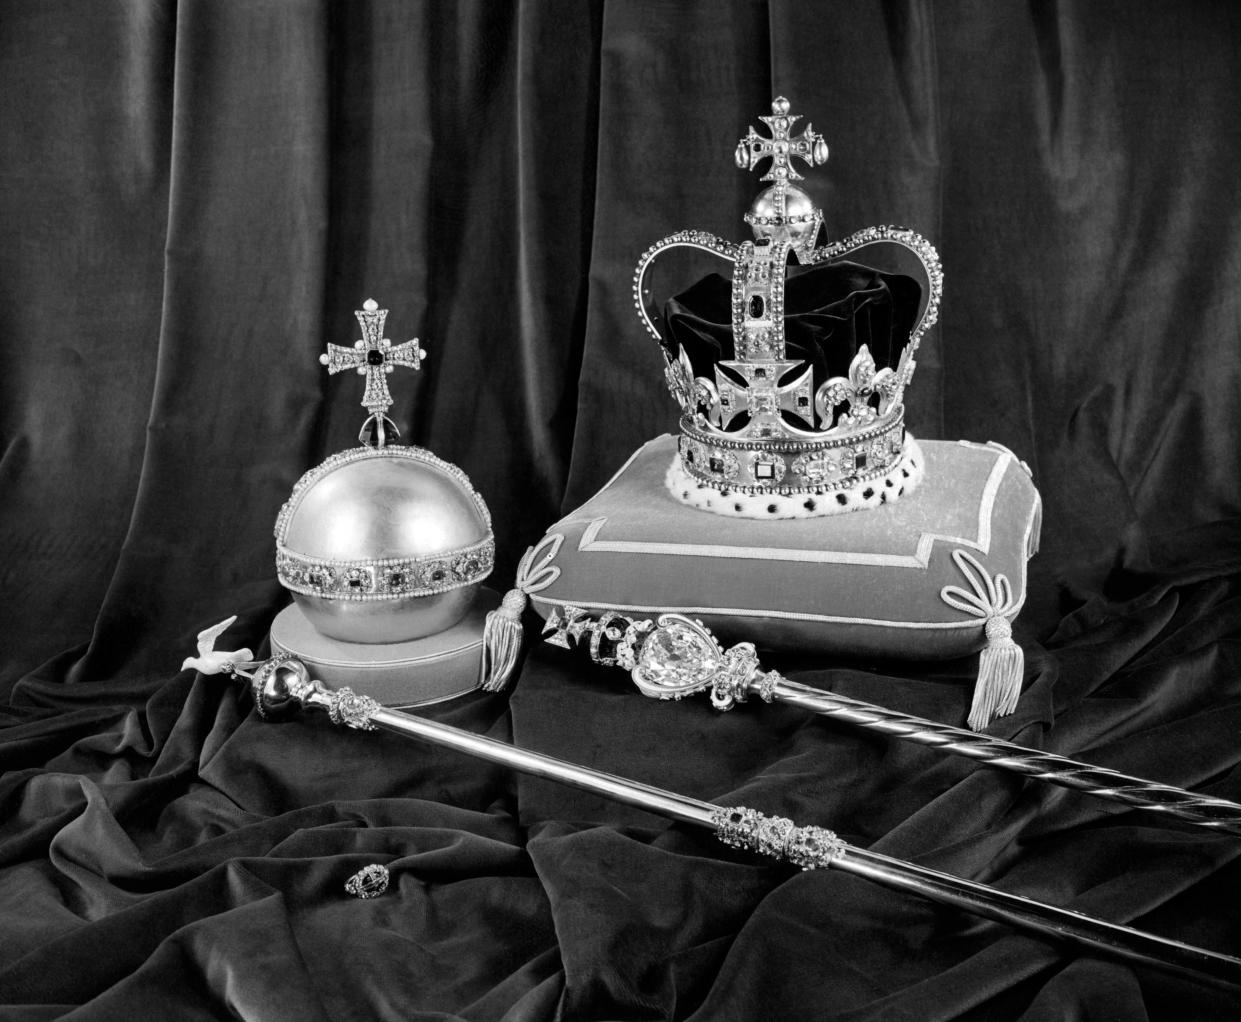 St Edward's Crown, The Orb, the Sceptre with Cross, the Sceptre with Dove and the Sovereign's Ring. (Royal Collection Trust/PA)